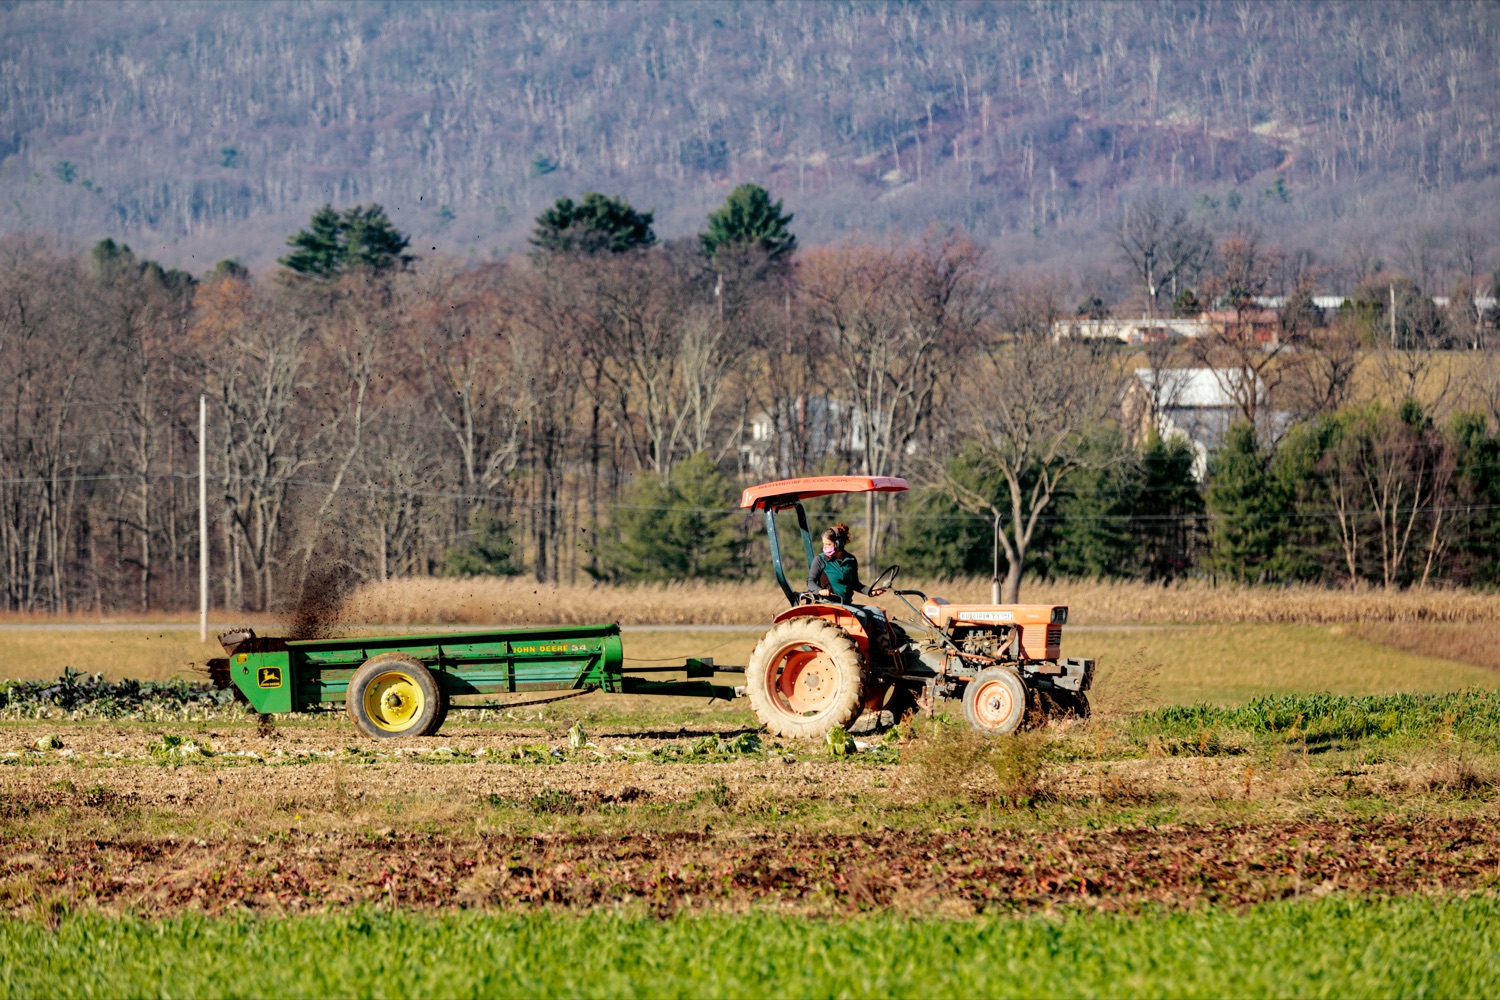 Aimee Good, co-owner and operator of The Good Farm, works the field in Germansville on Friday, November 20, 2020.<br><a href="https://filesource.amperwave.net/commonwealthofpa/photo/18325_AGRIC_Farm_Show_NK_010.jpg" target="_blank">⇣ Download Photo</a>